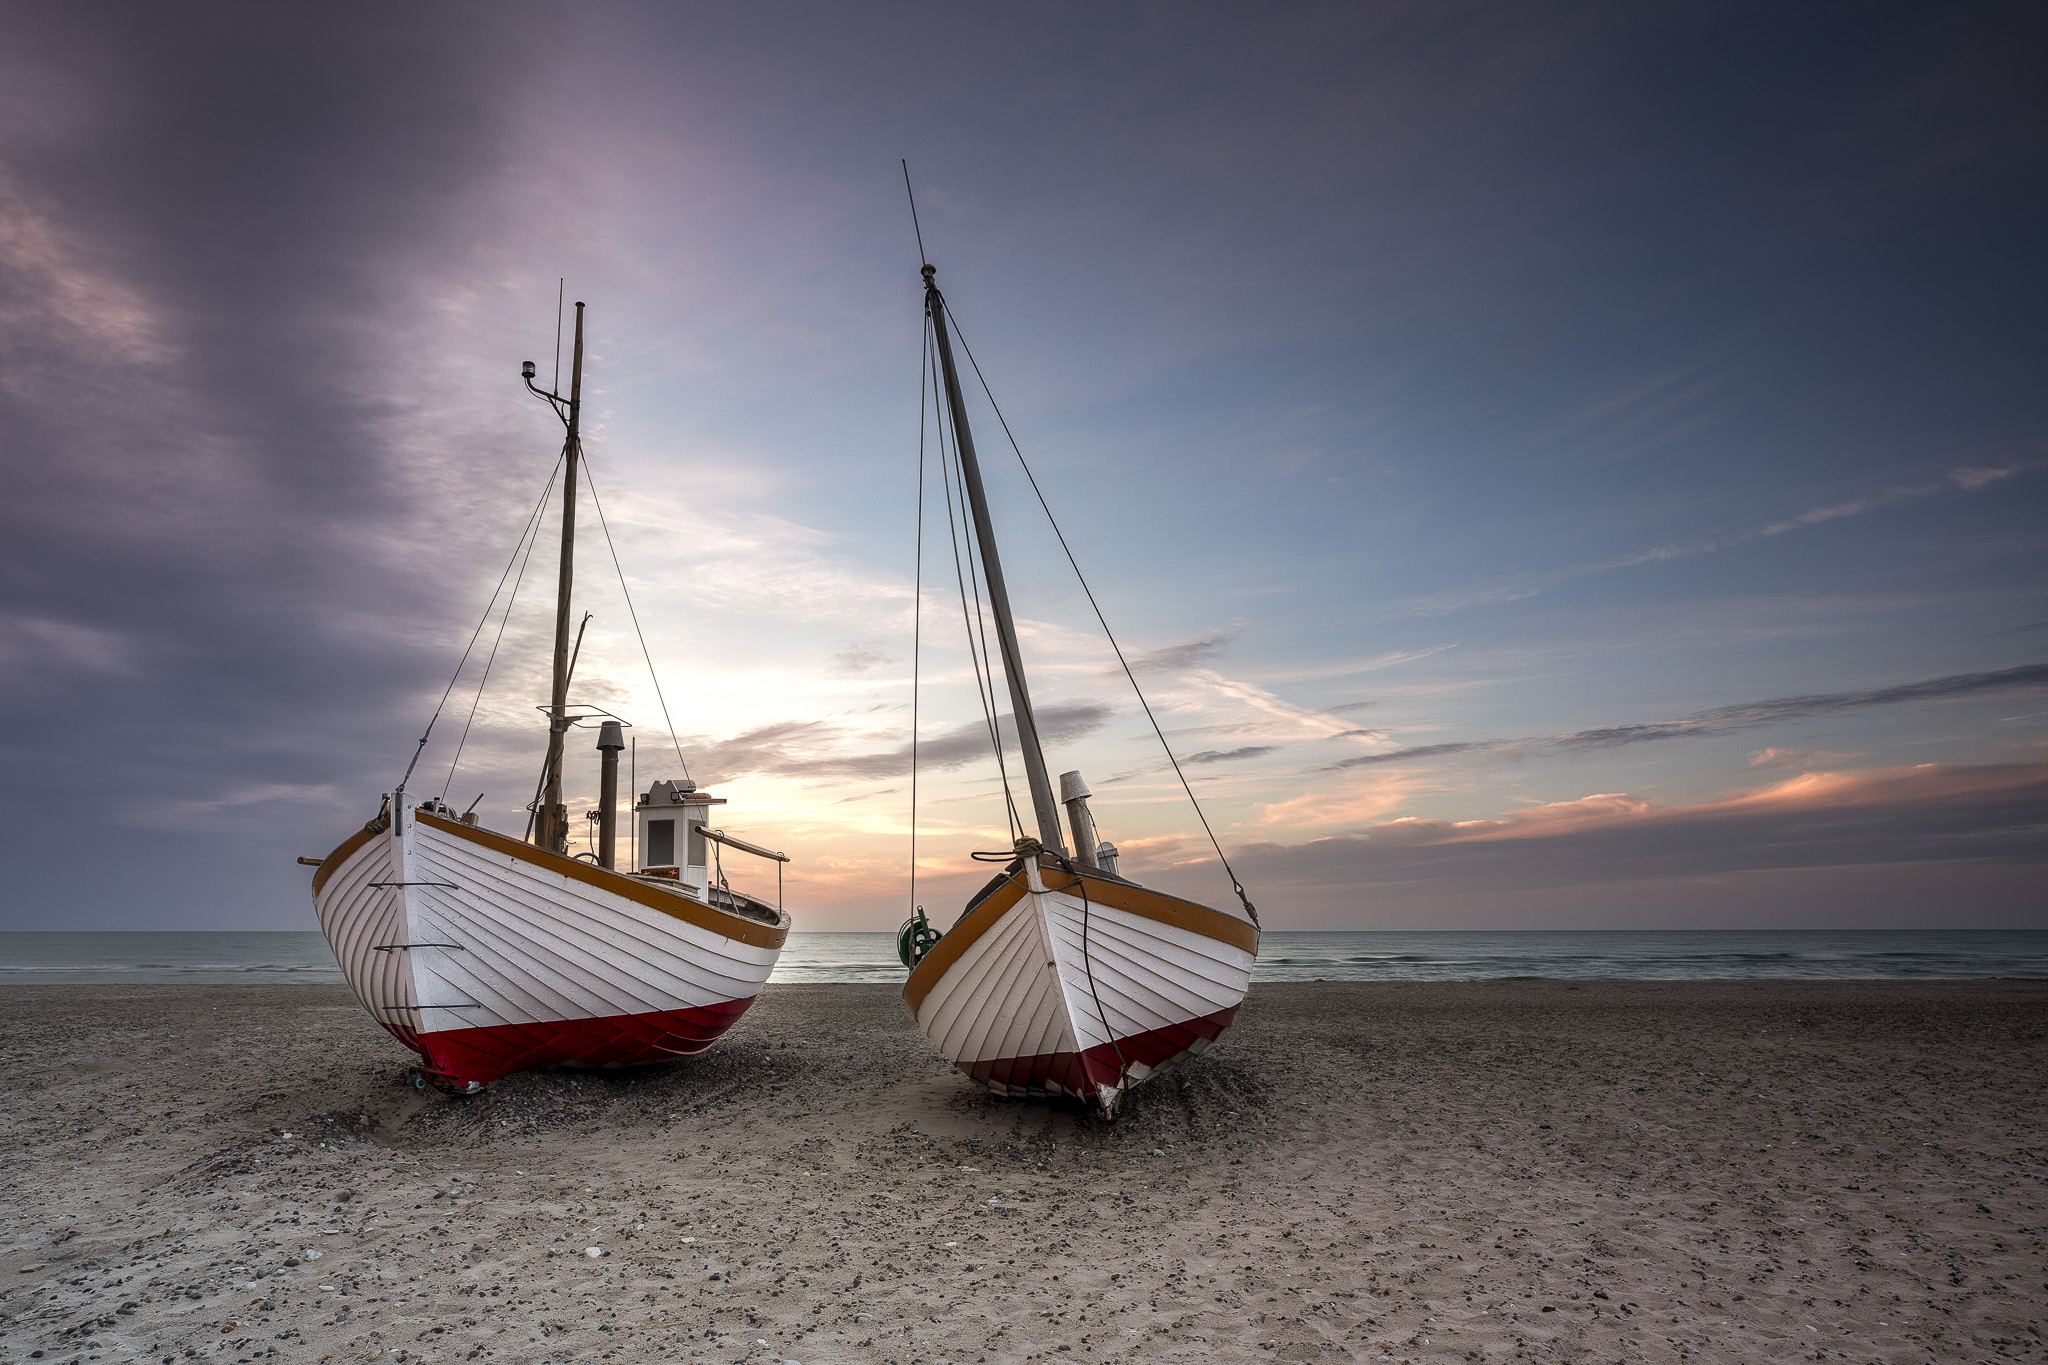 Two fishing boats on a beach in Northern Jutland during sunset